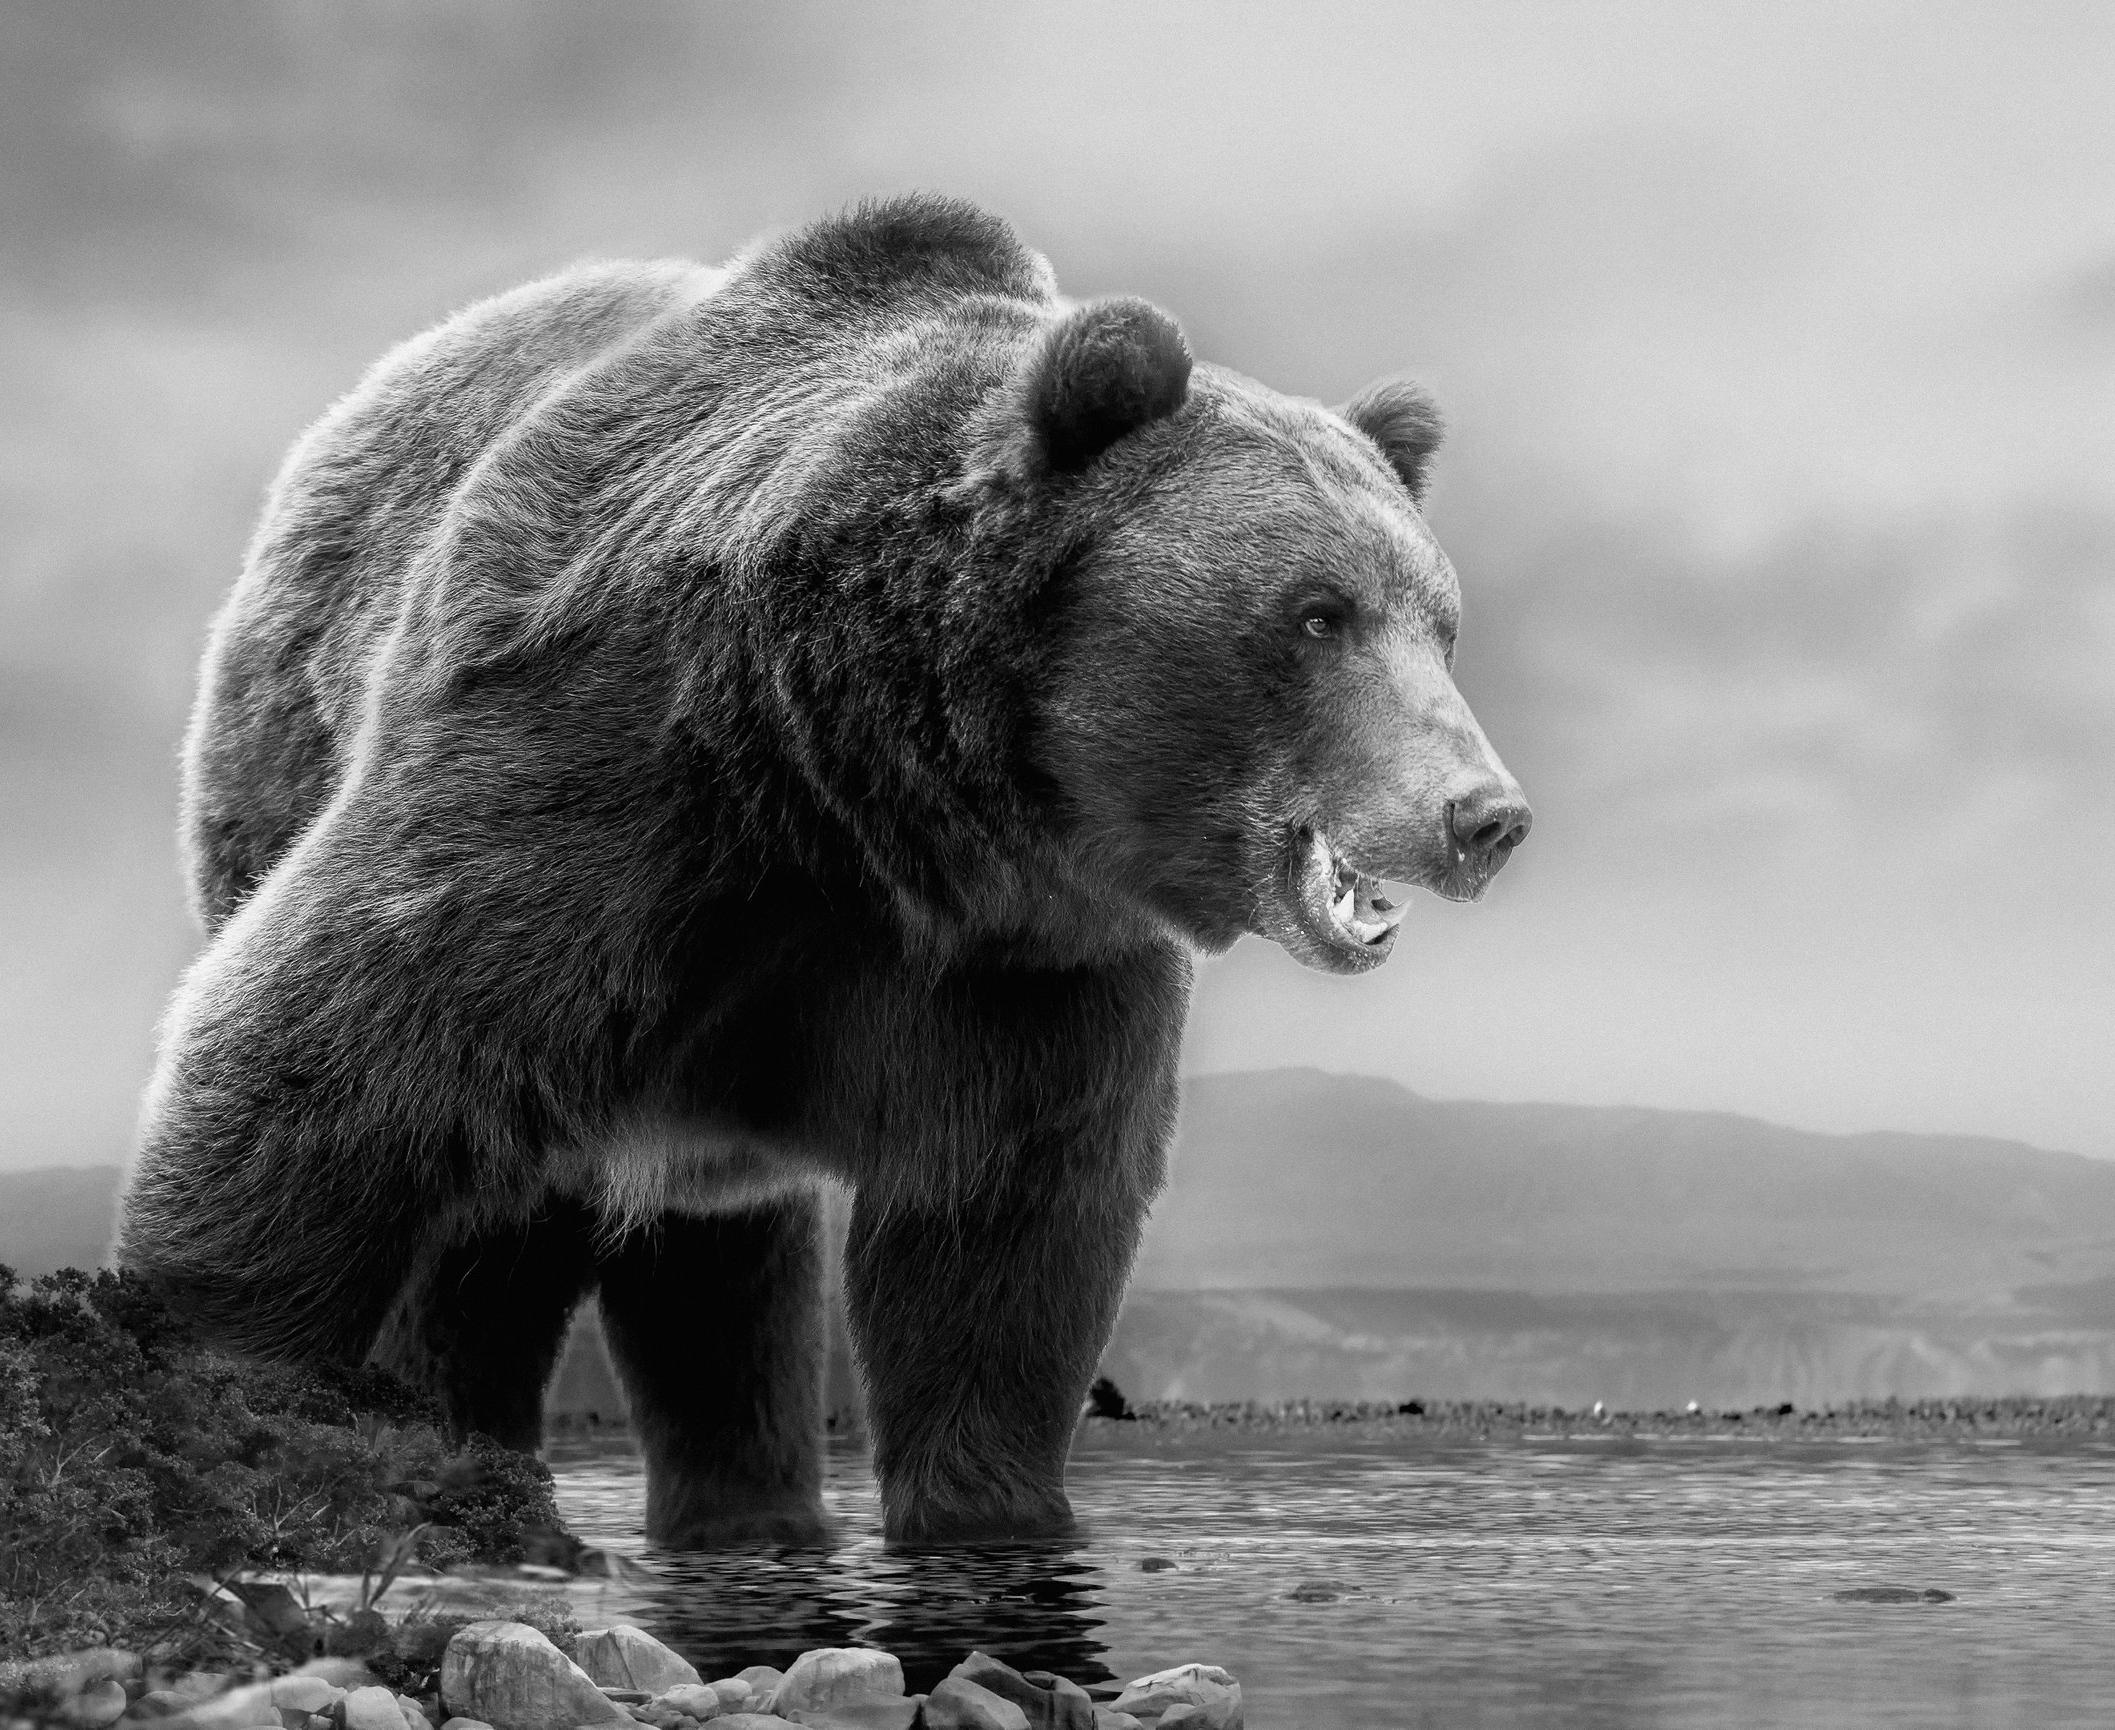 Shane Russeck Animal Print - On The Waterfront 36x48 Black & White Photography Kodiak Grizzly Bear Unsigned